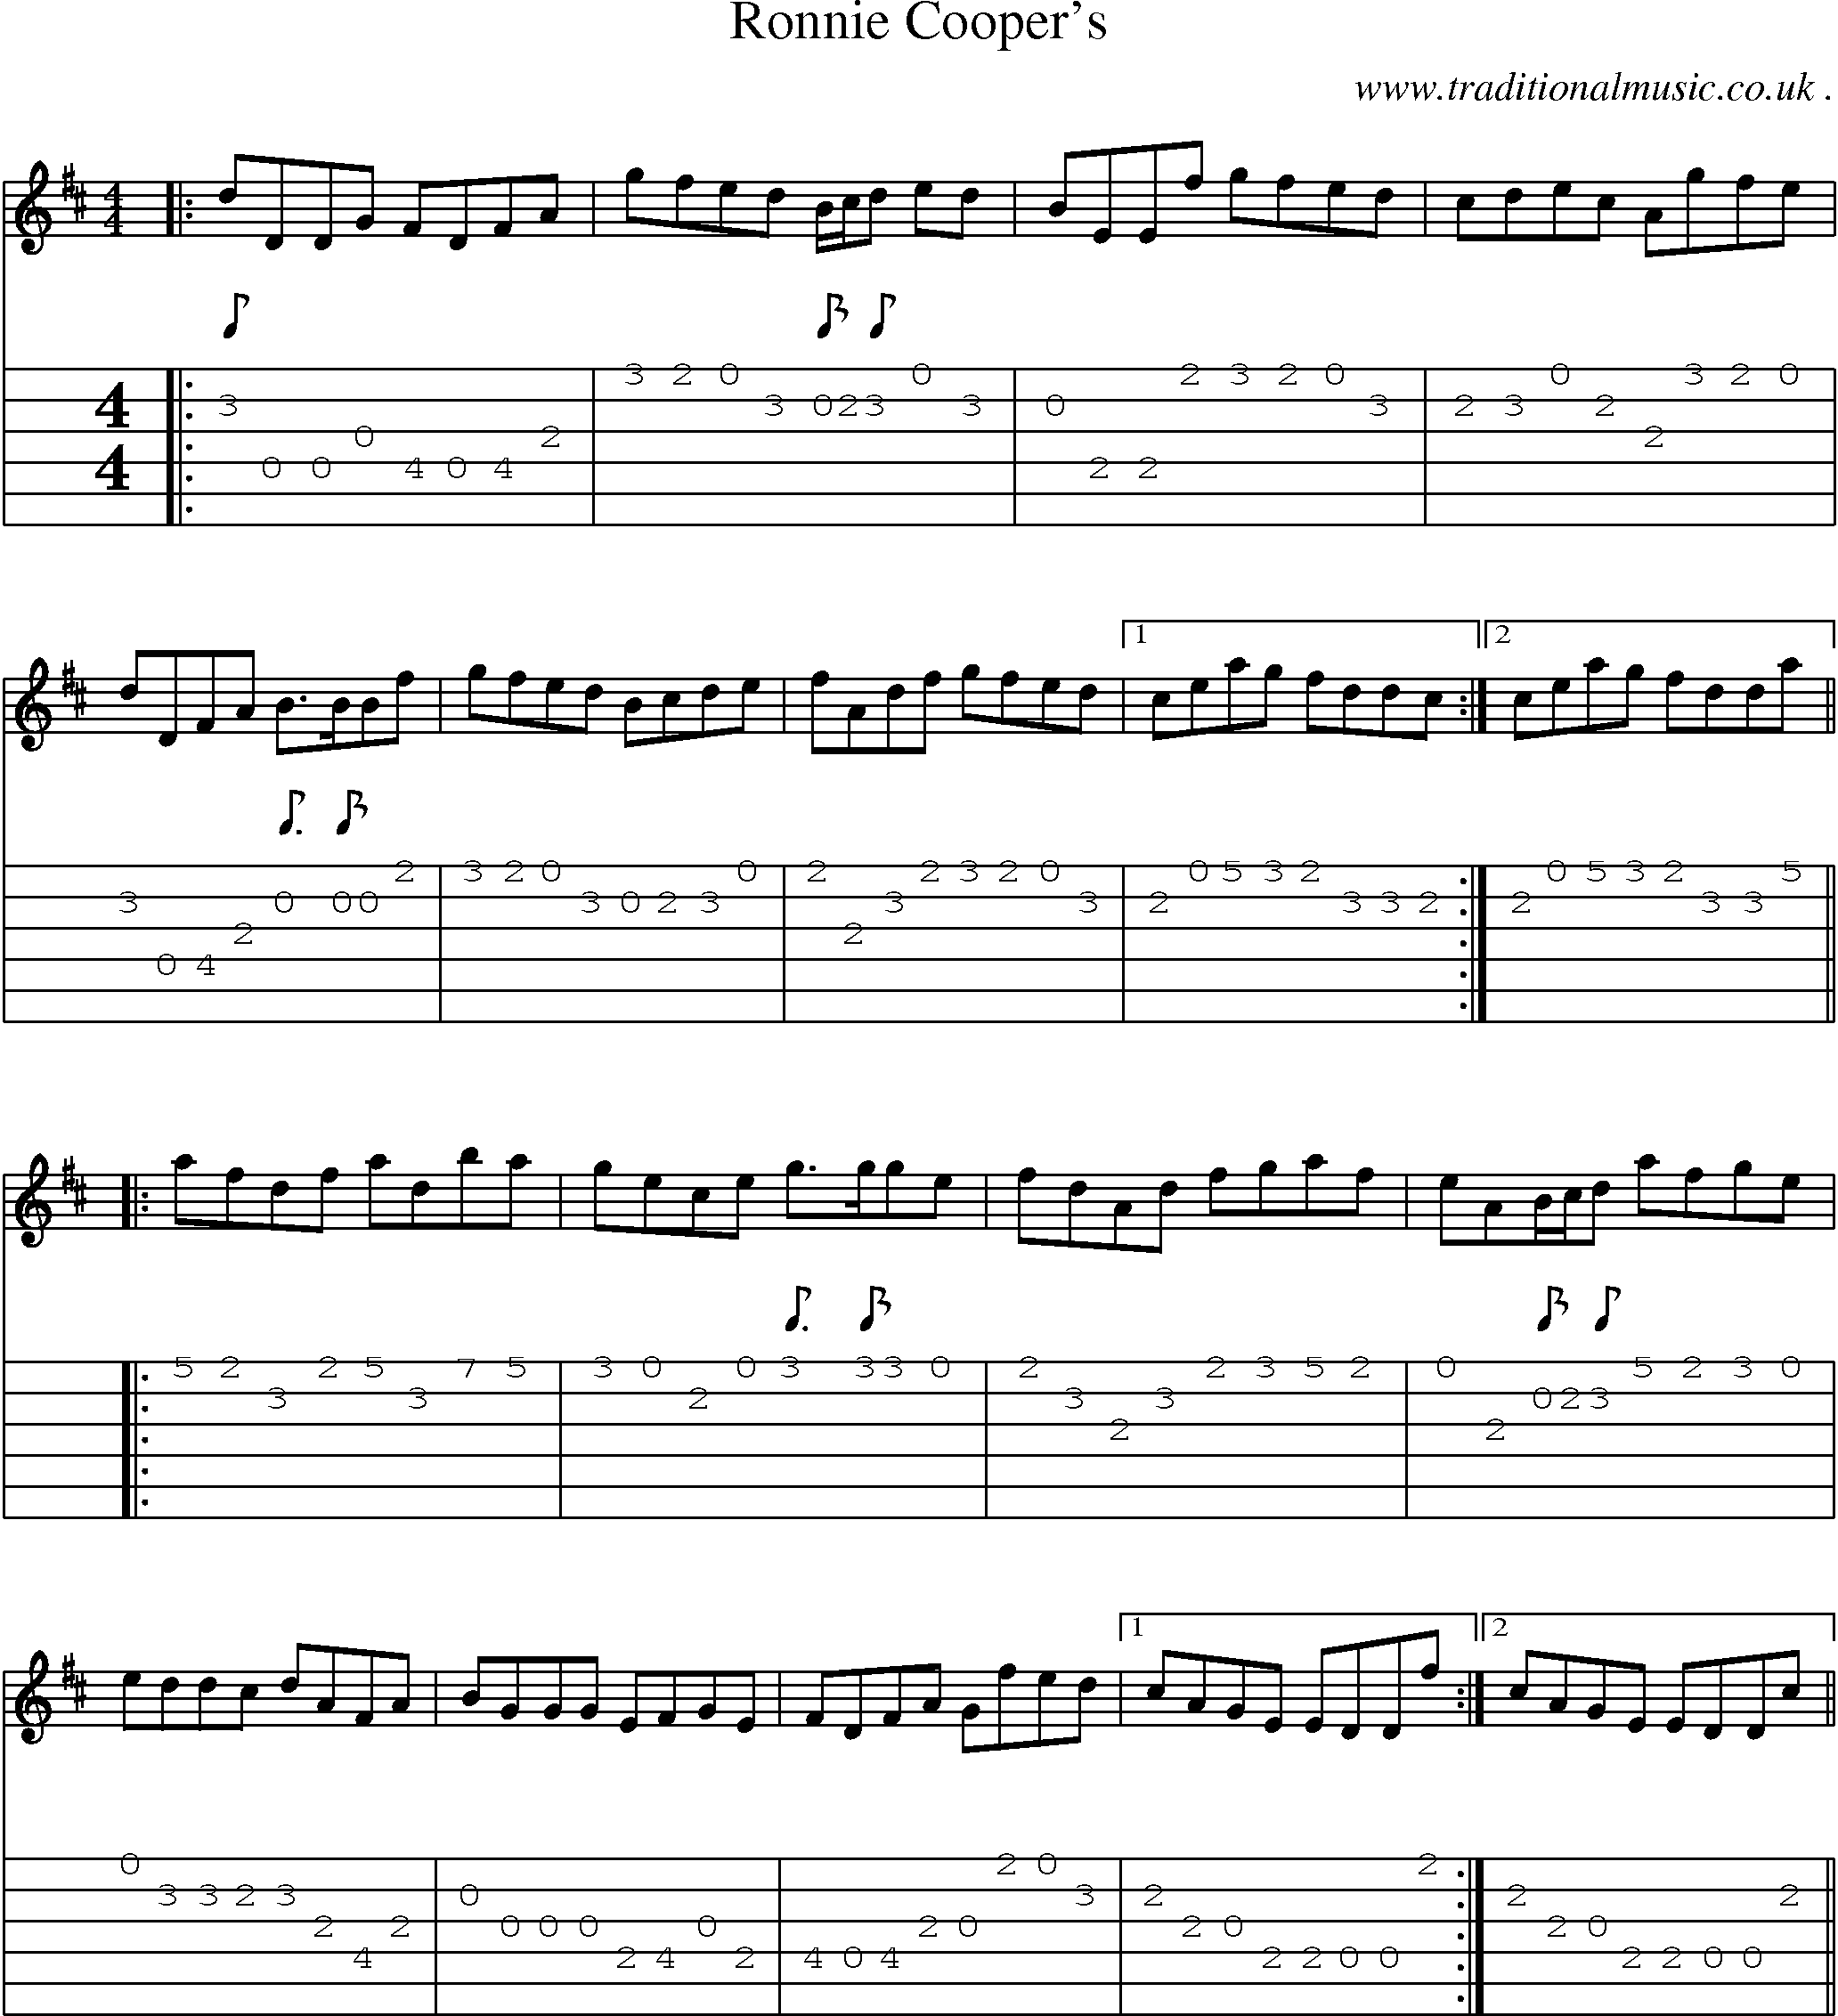 Sheet-music  score, Chords and Guitar Tabs for Ronnie Coopers